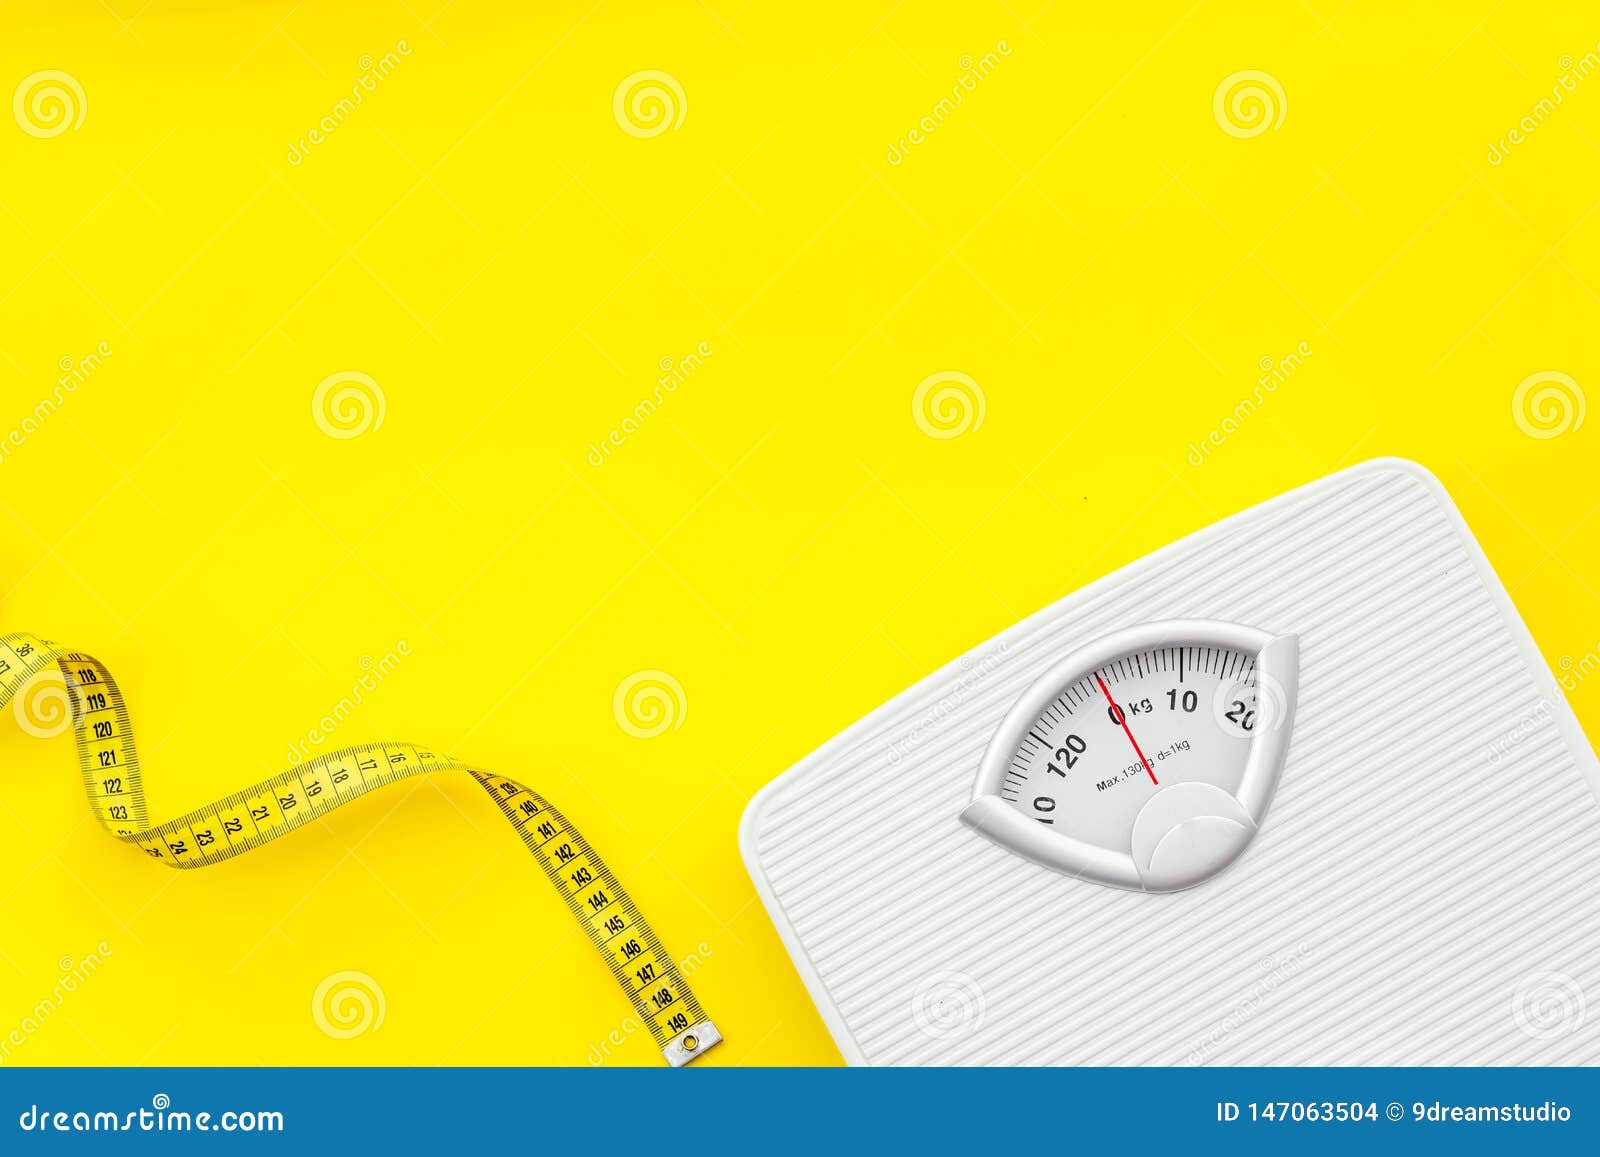 Download Bathroom Scales And Measuring Tape For Weight Loss Concept ...